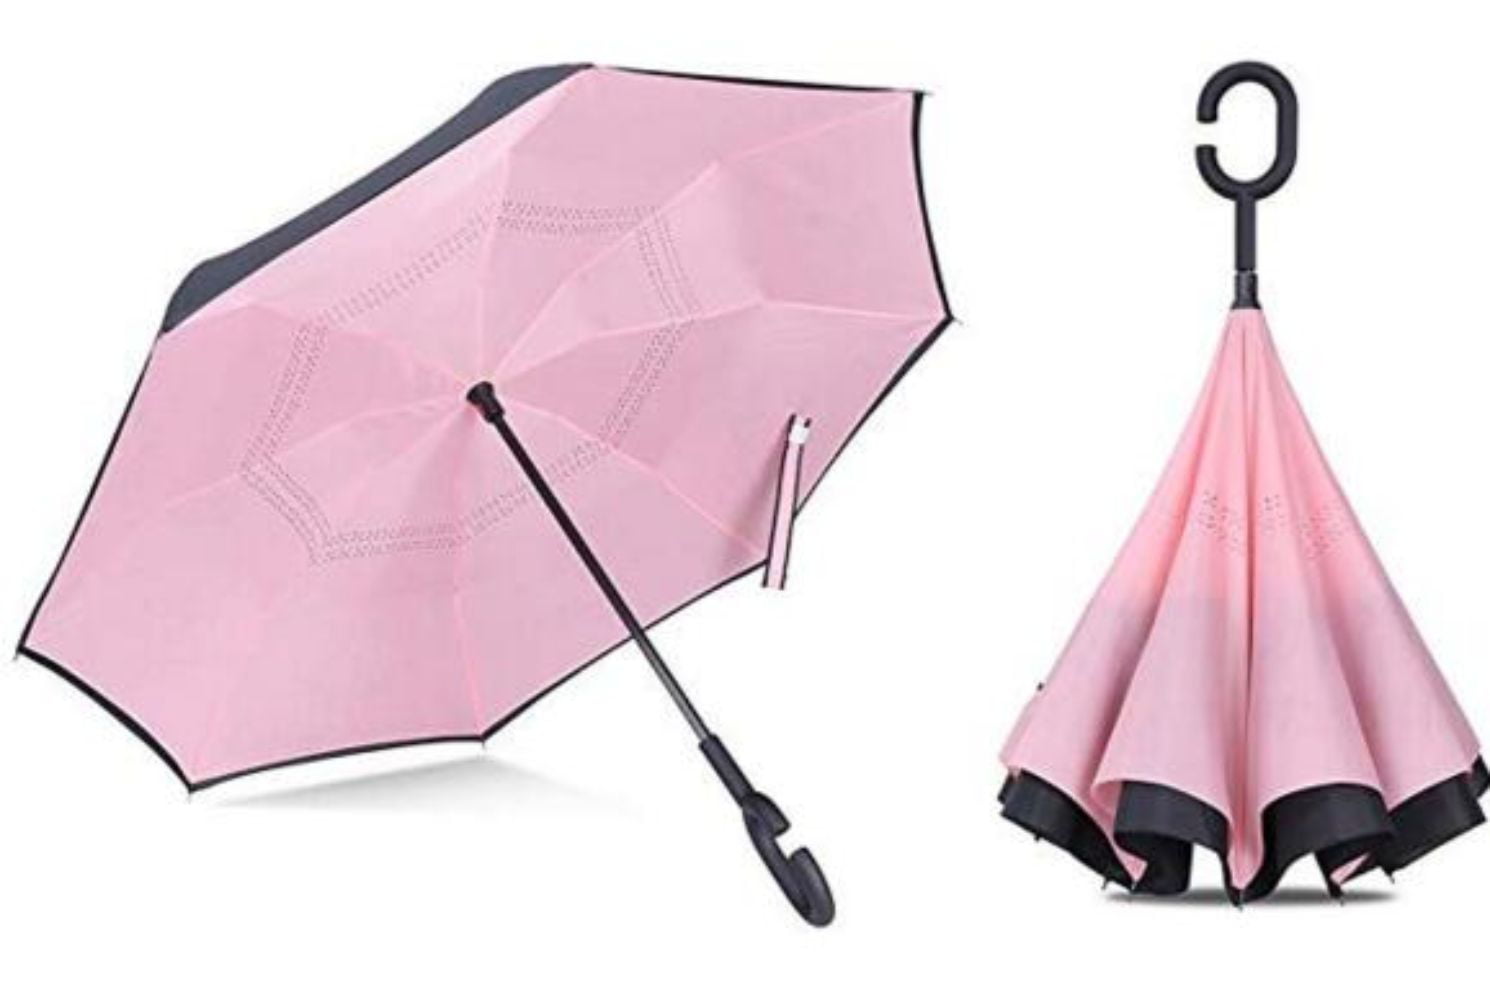 Flowers And Birds Double Layer Windproof UV Protection Reverse Umbrella With C-Shaped Handle Upside-Down Inverted Umbrella For Car Rain Outdoor